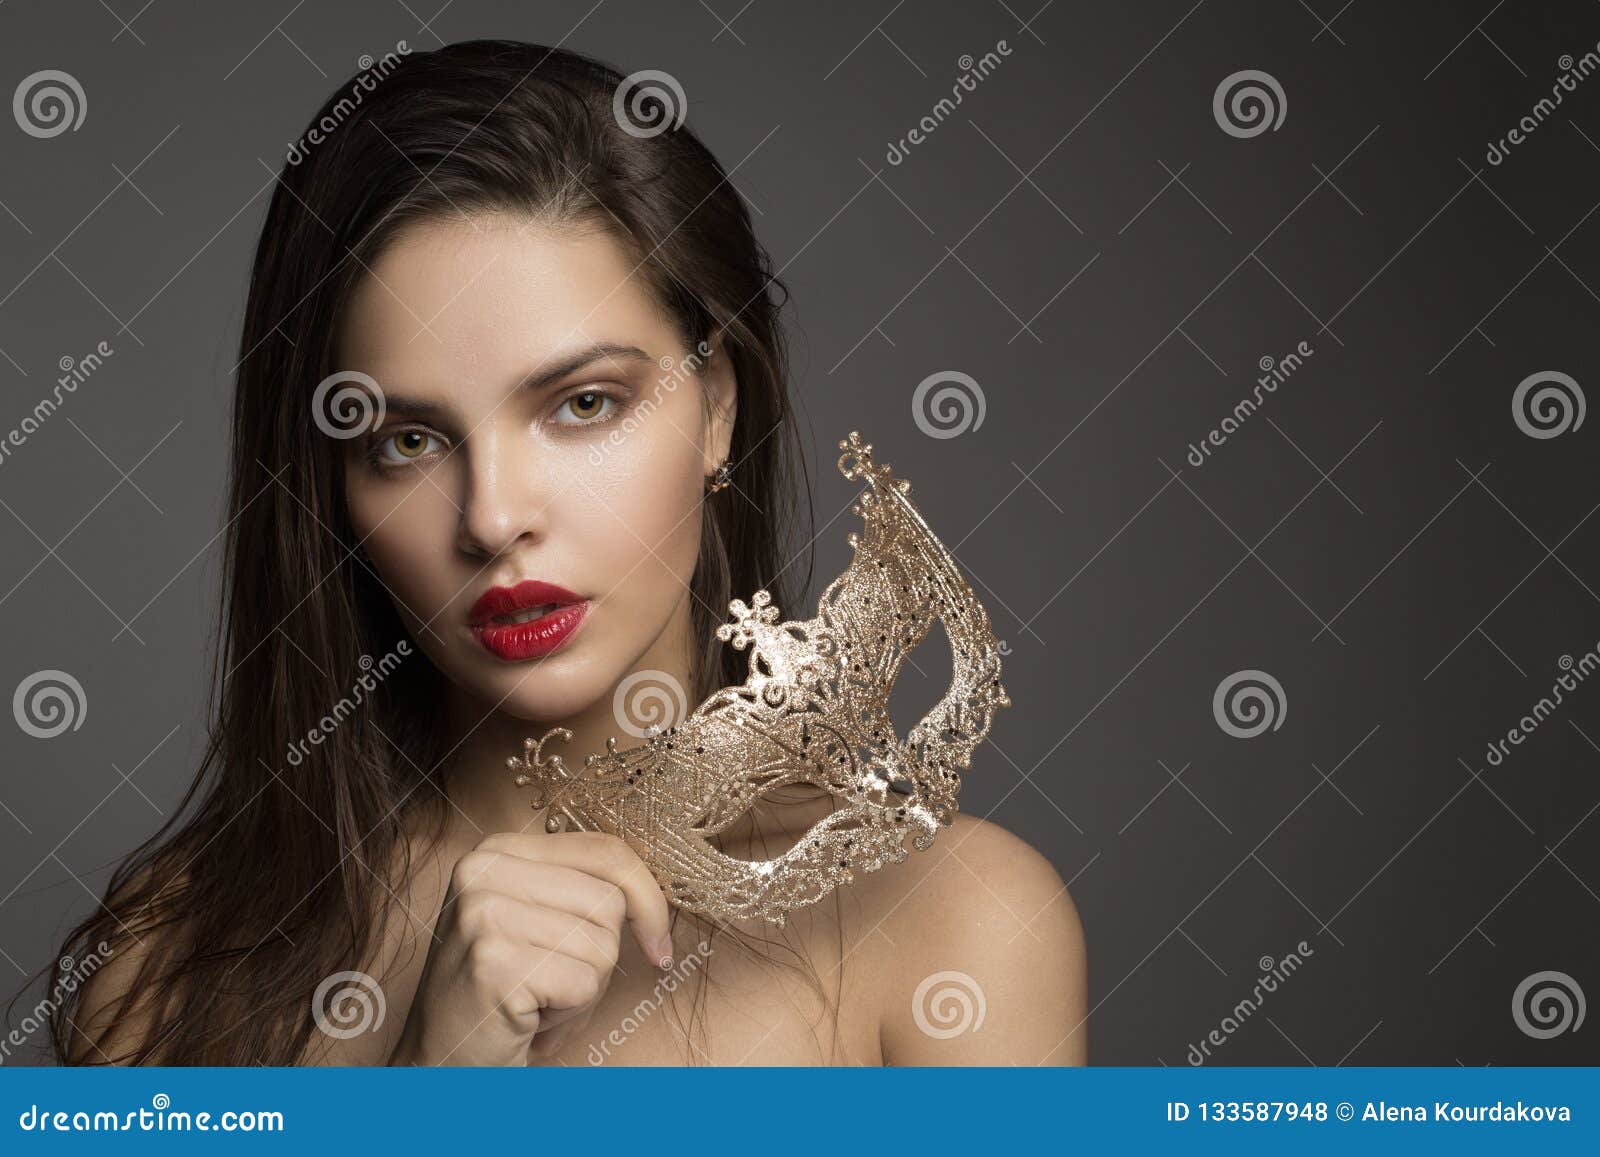 Fashion Woman With Long Hair And Red Lipstick With Golden